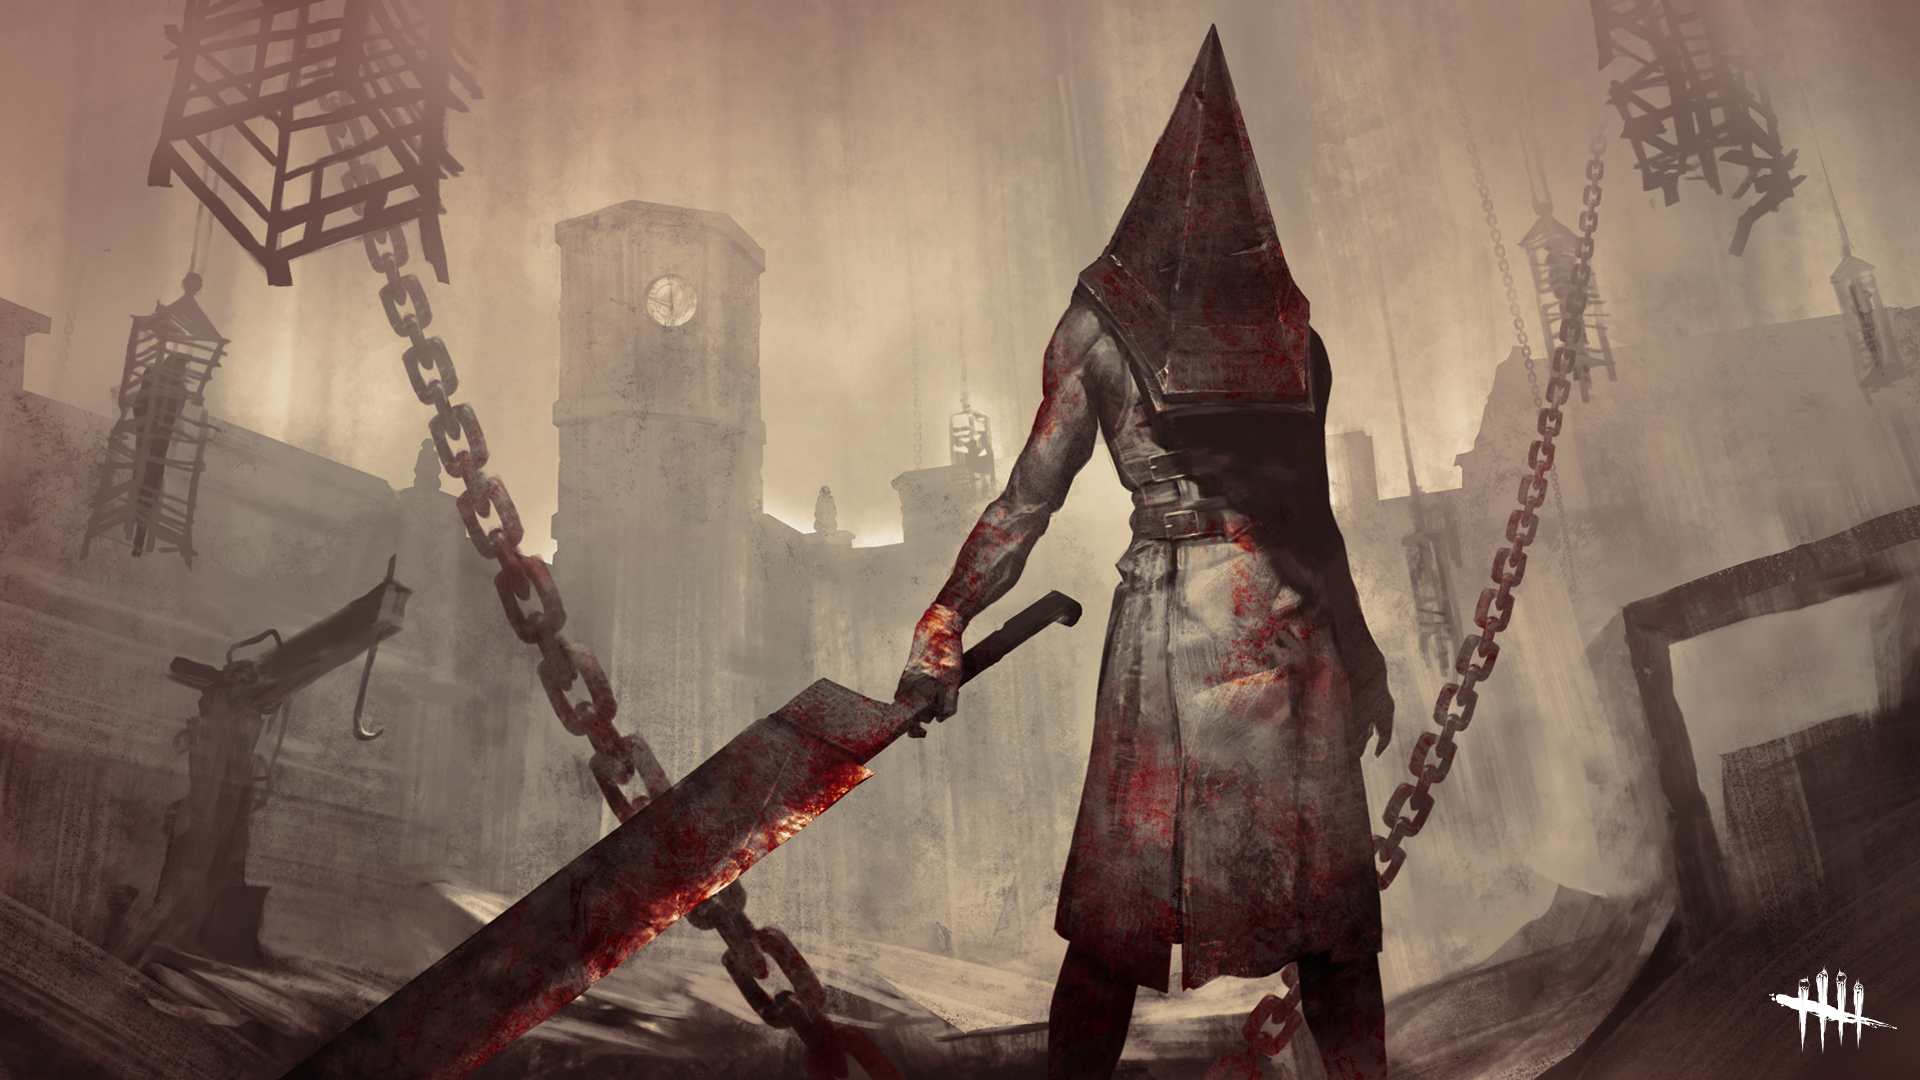 General 1920x1080 Dead by Daylight video games video game art horror Silent Hill Pyramid Head Video Game Horror chains blood